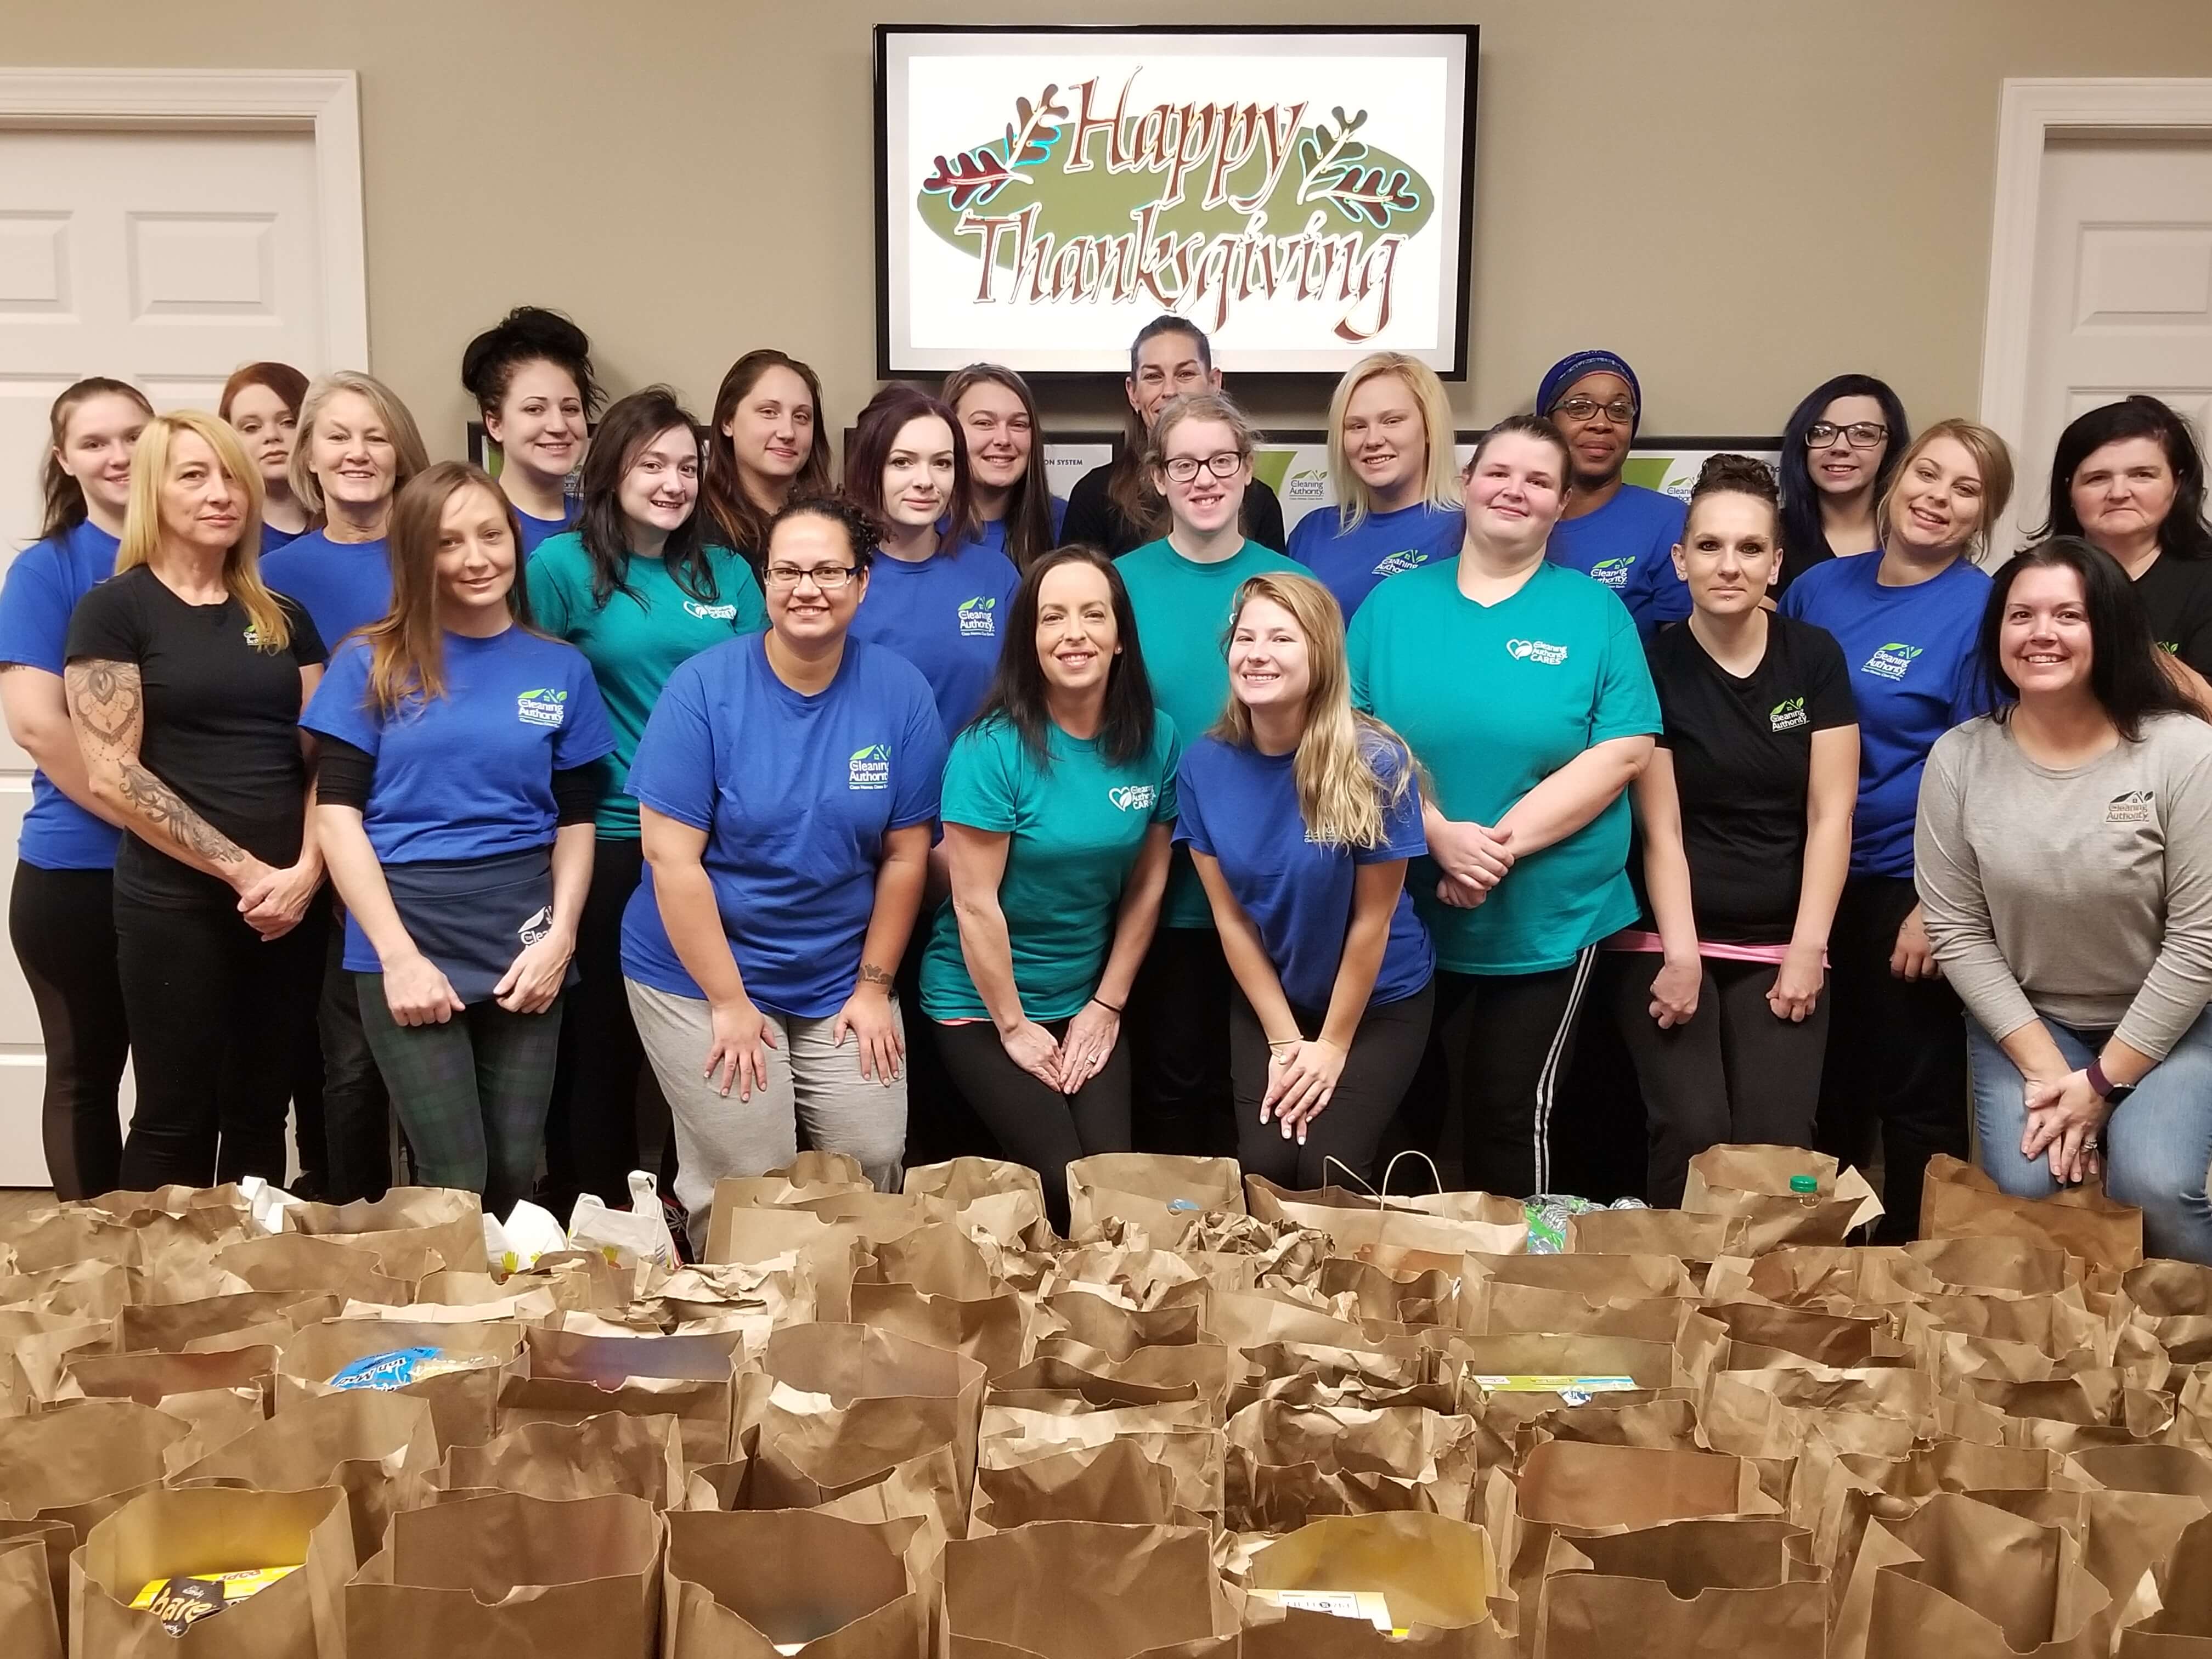 The TCA Broadview Heights team poses with the food donations collected for local charities.